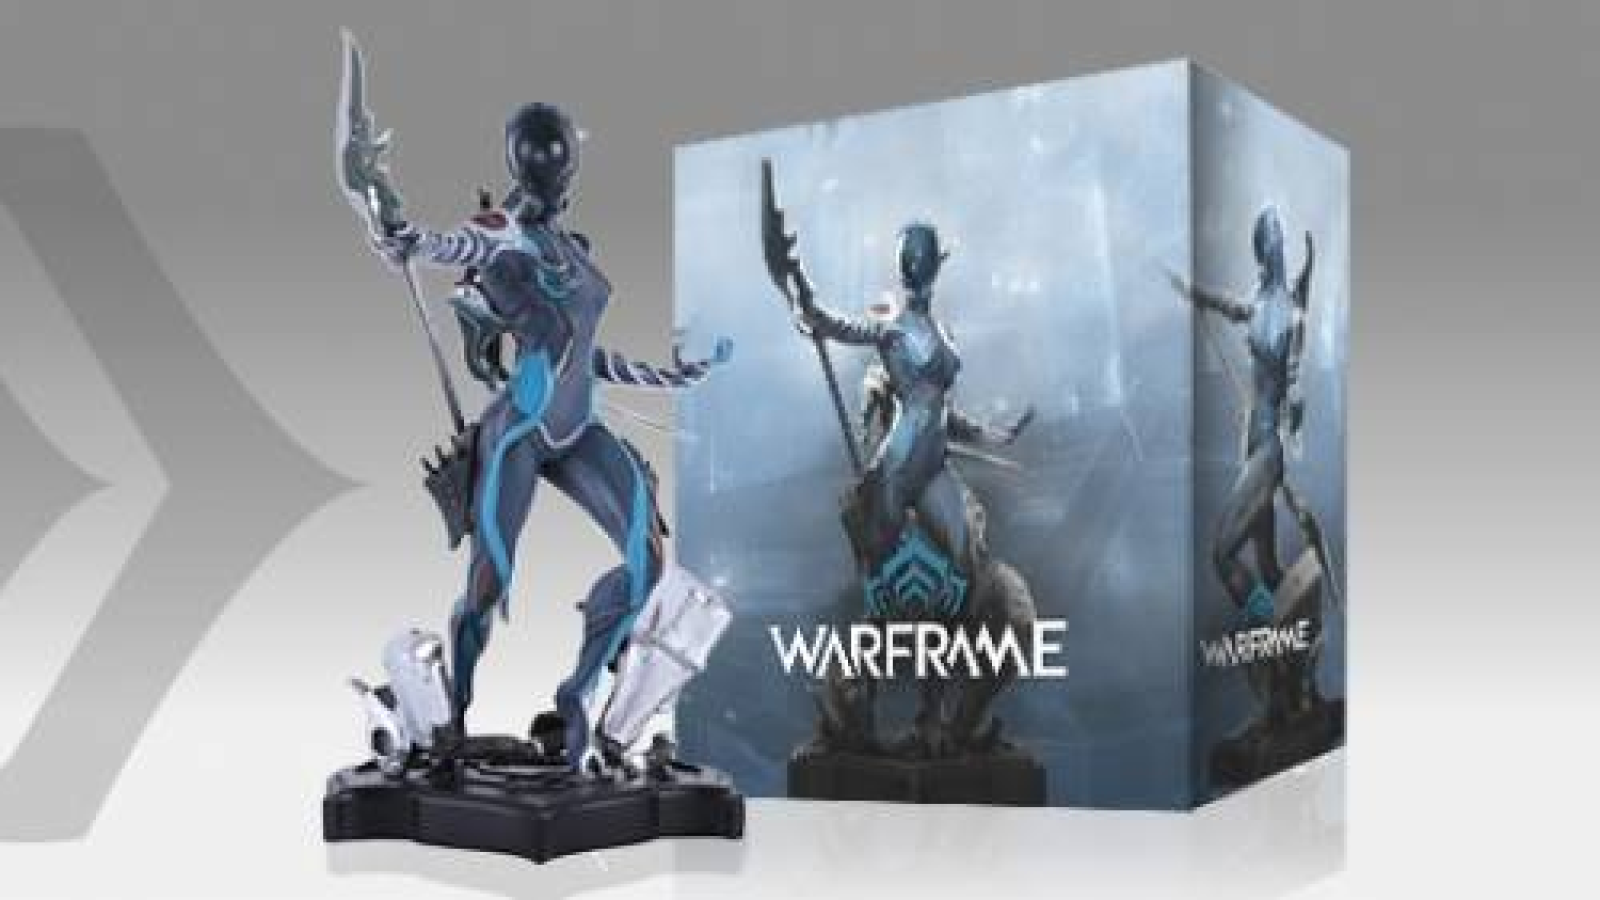 LIMITED EDITION MAG STATUE COMING SOON 